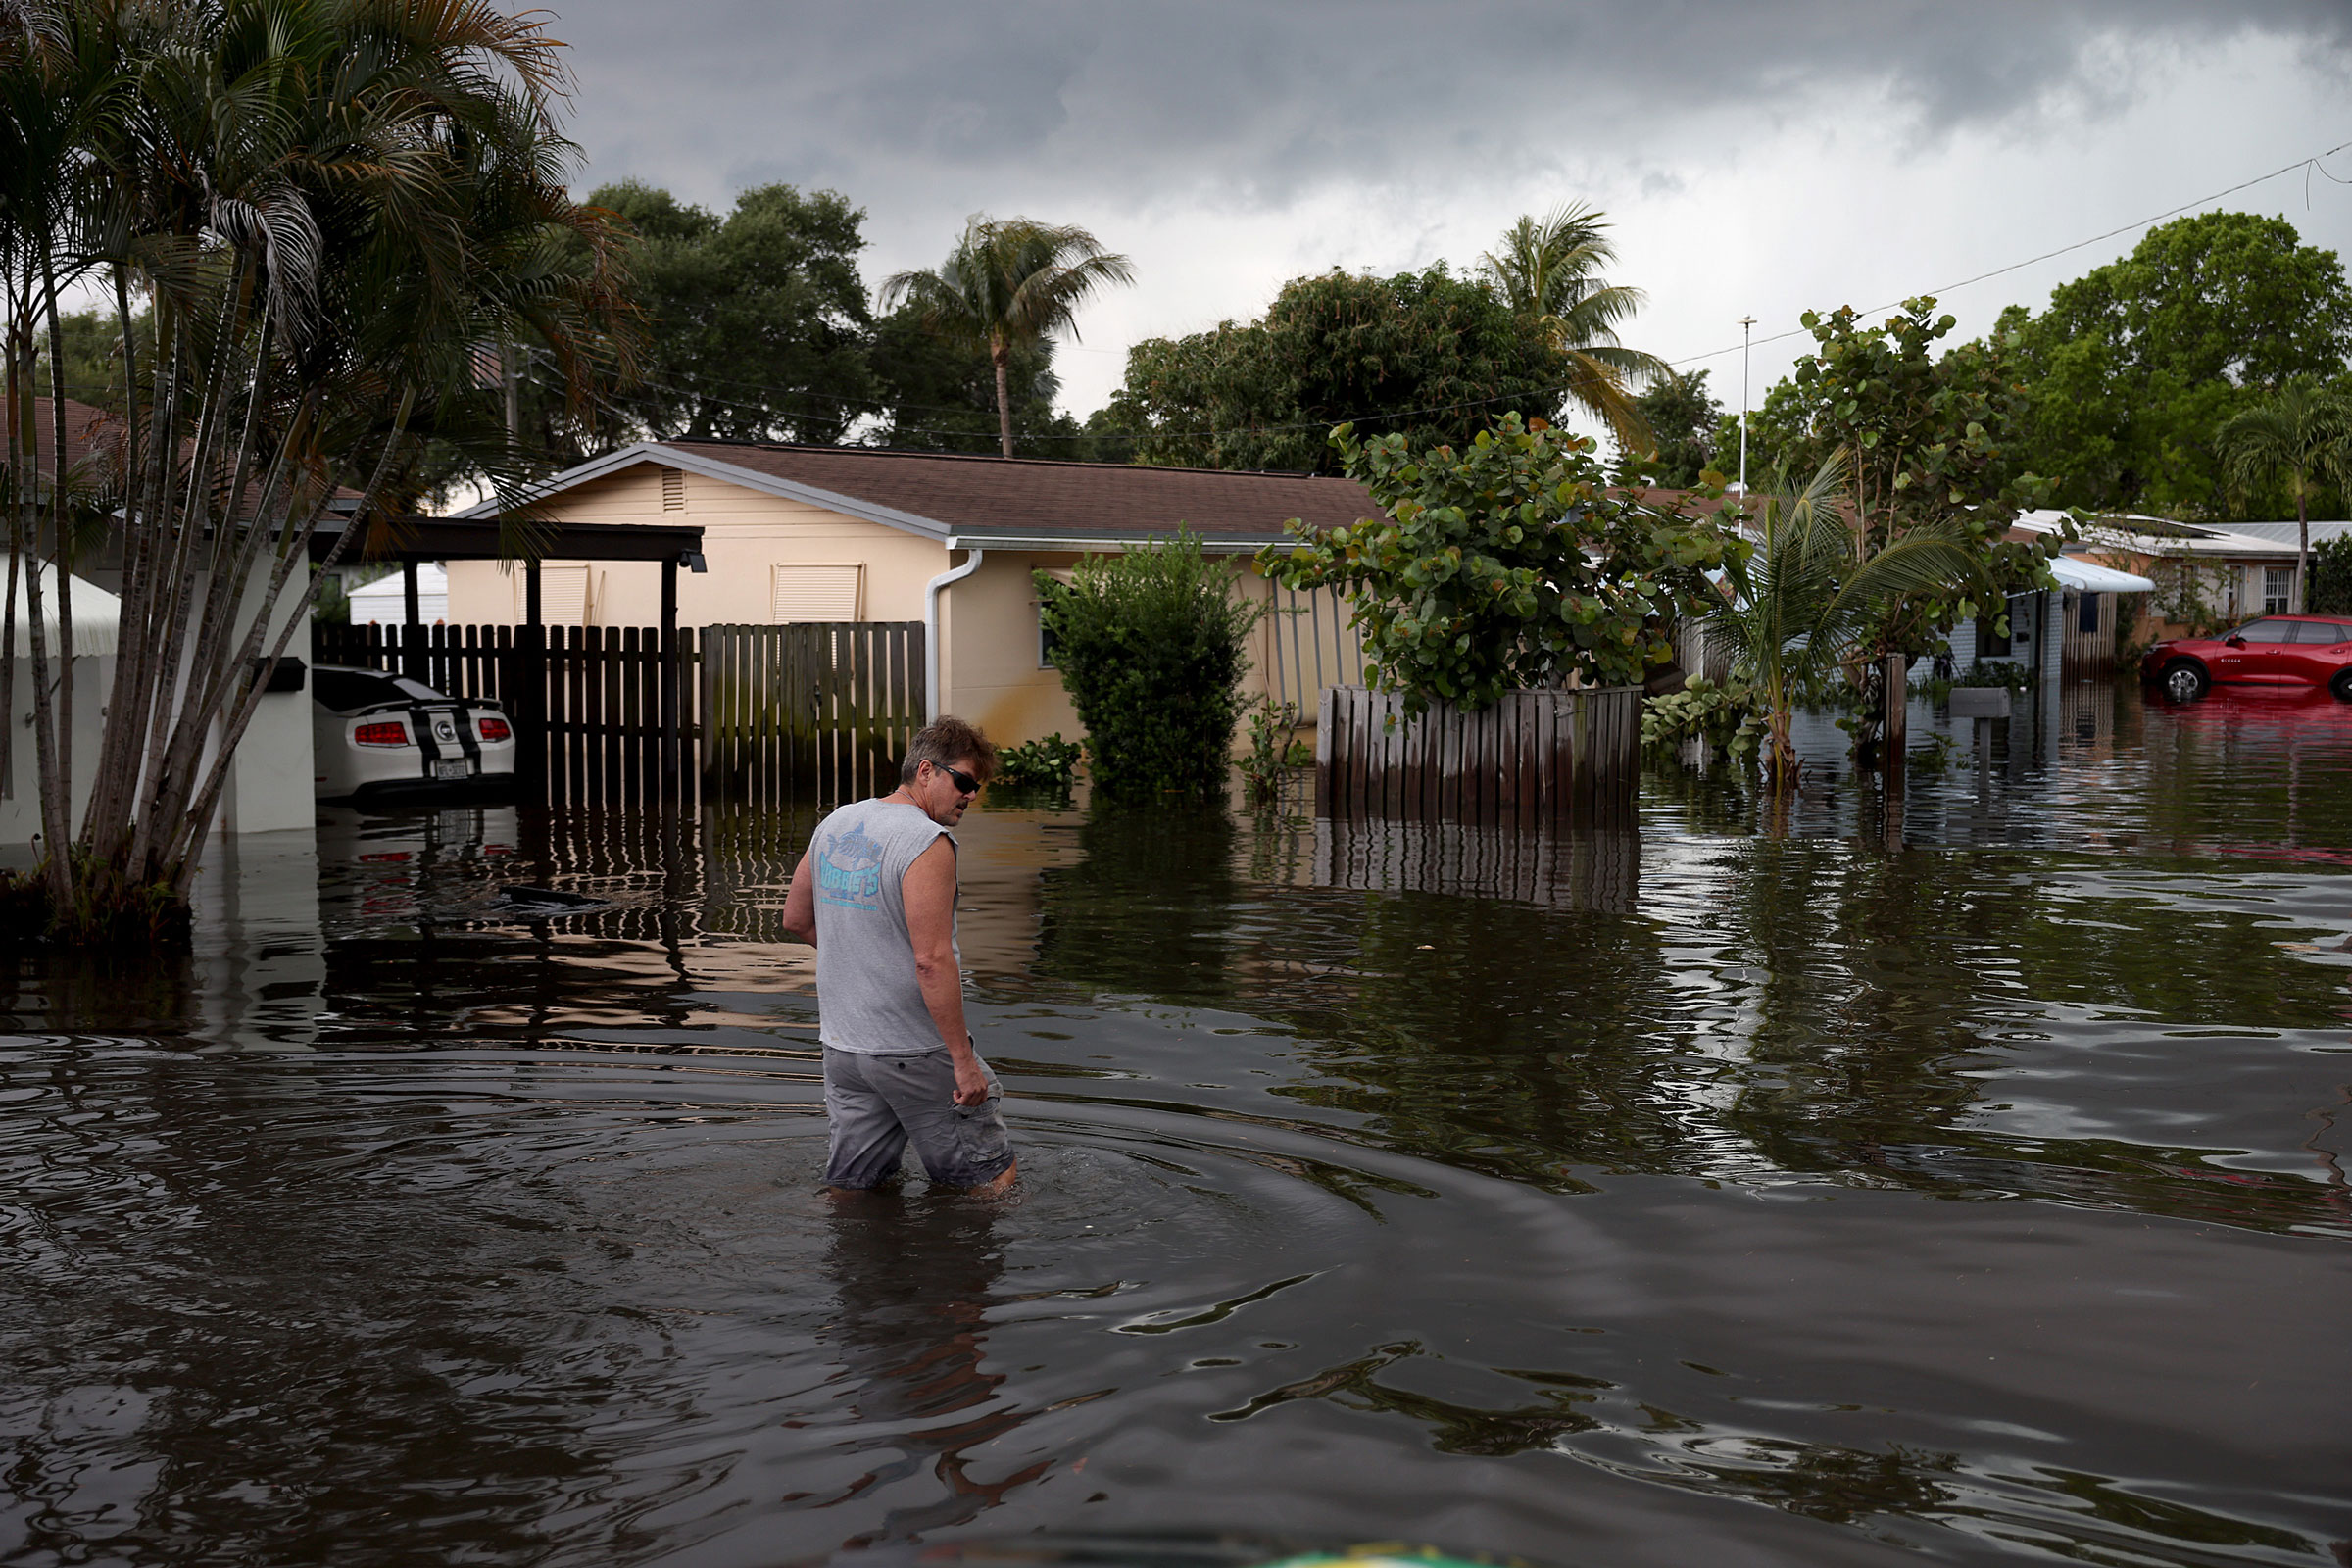 A person walks through a flooded street in Fort Lauderdale, Fla., on April 13, 2023. (Joe Raedle—Getty Images)